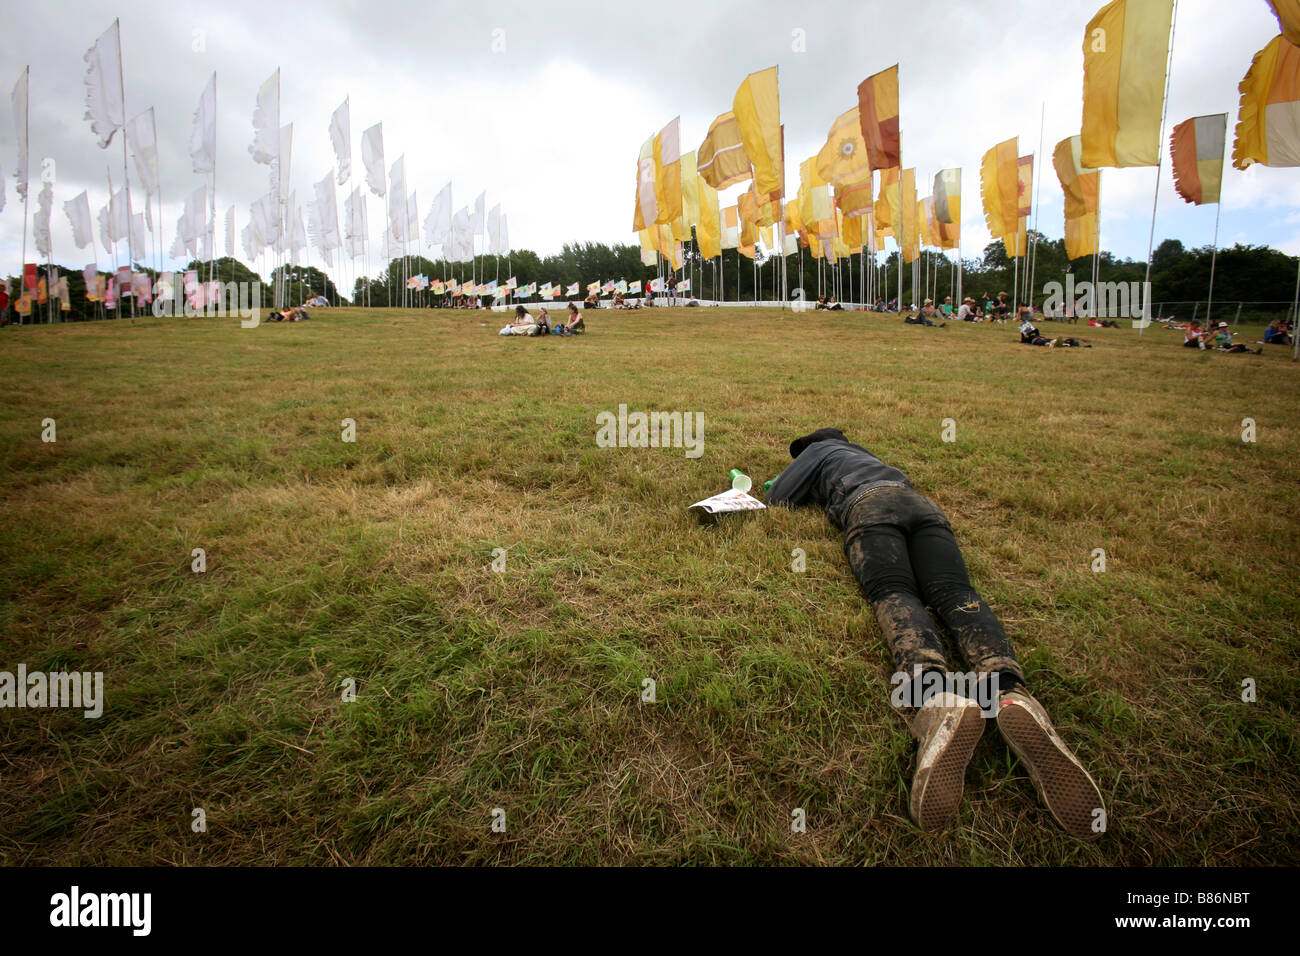 A man lies asleep in the middle of the day in a field at the Glastonbury Festival in PIlton, Somerset in the UK. Stock Photo